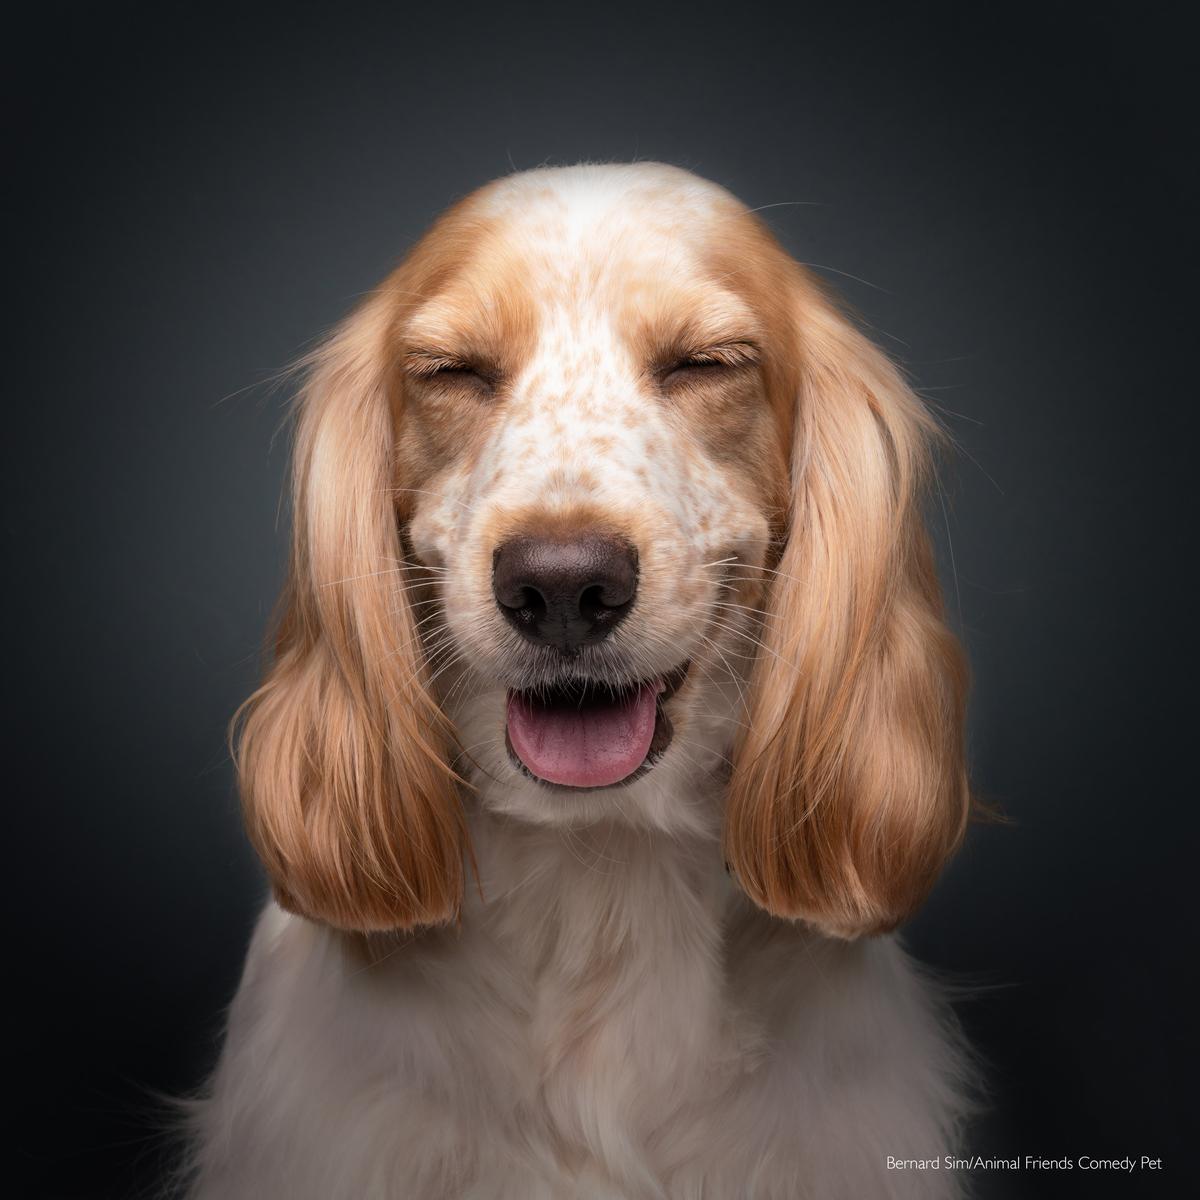 "Popcorn is a rather shy dog and keeps looking away from the camera. Had to shoot a lot to get some usable ones and of course bloopers included." (Courtesy of Bernard Sim/<a href="https://www.facebook.com/AnimalFriendsPetInsurance">Animal Friends Comedy Pets</a>)